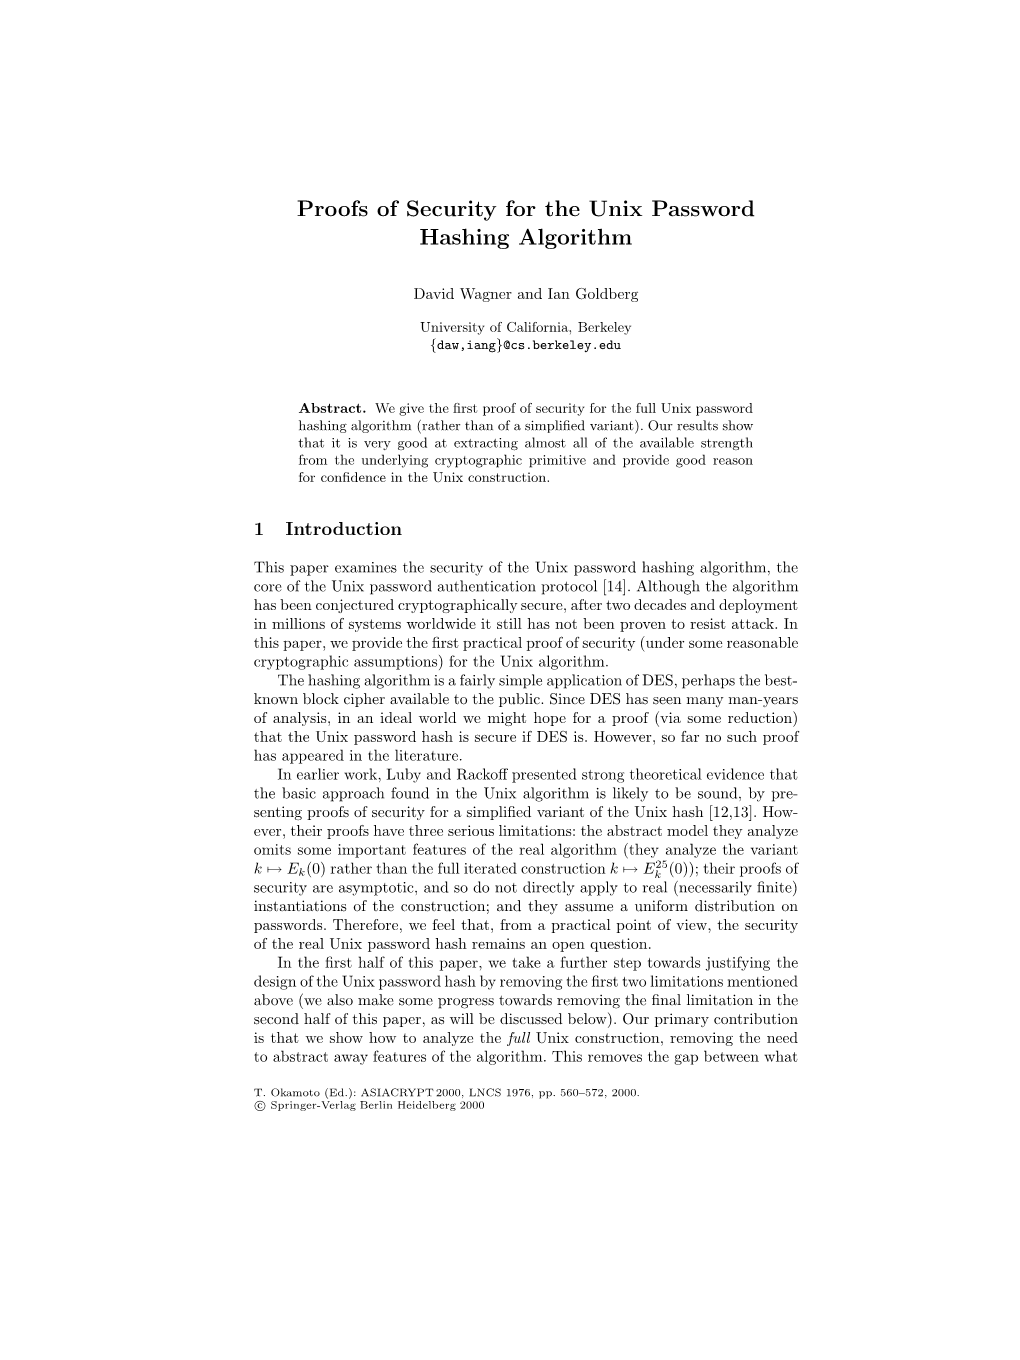 Proofs of Security for the Unix Password Hashing Algorithm